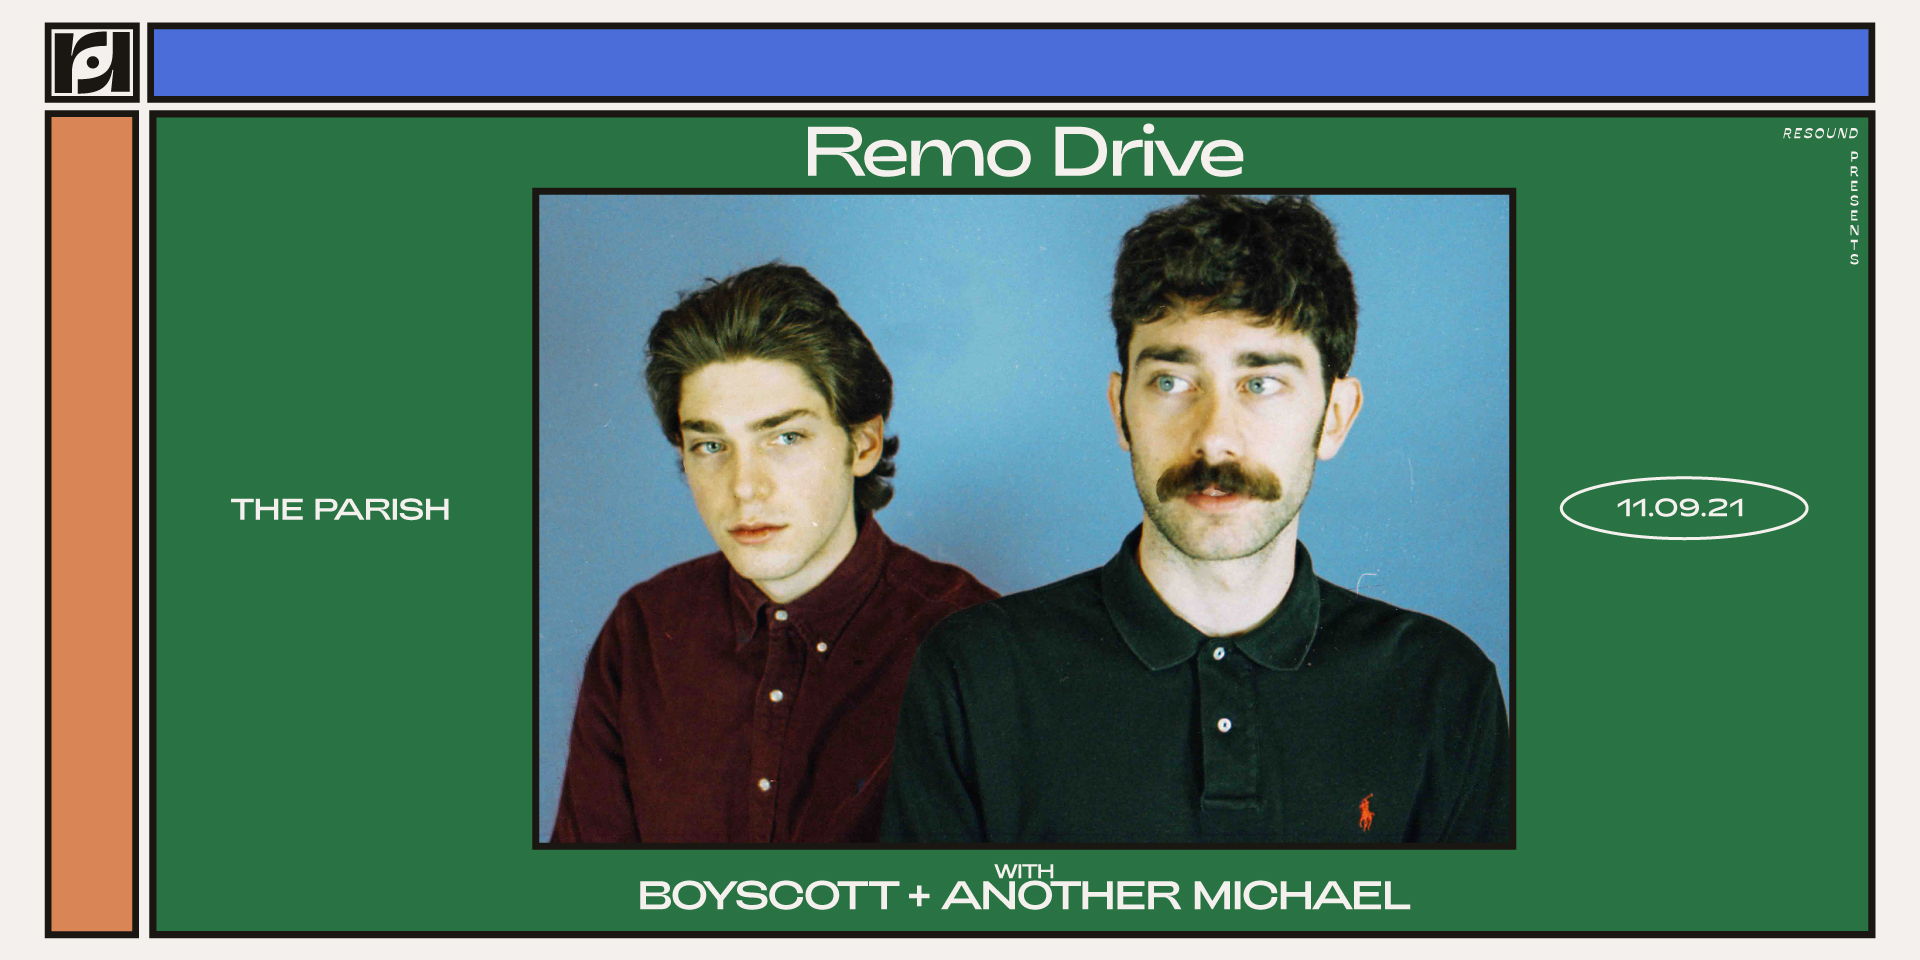 Remo Drive w/ special guests Boyscott and Another Michael at The Parish 11/9 promotional image